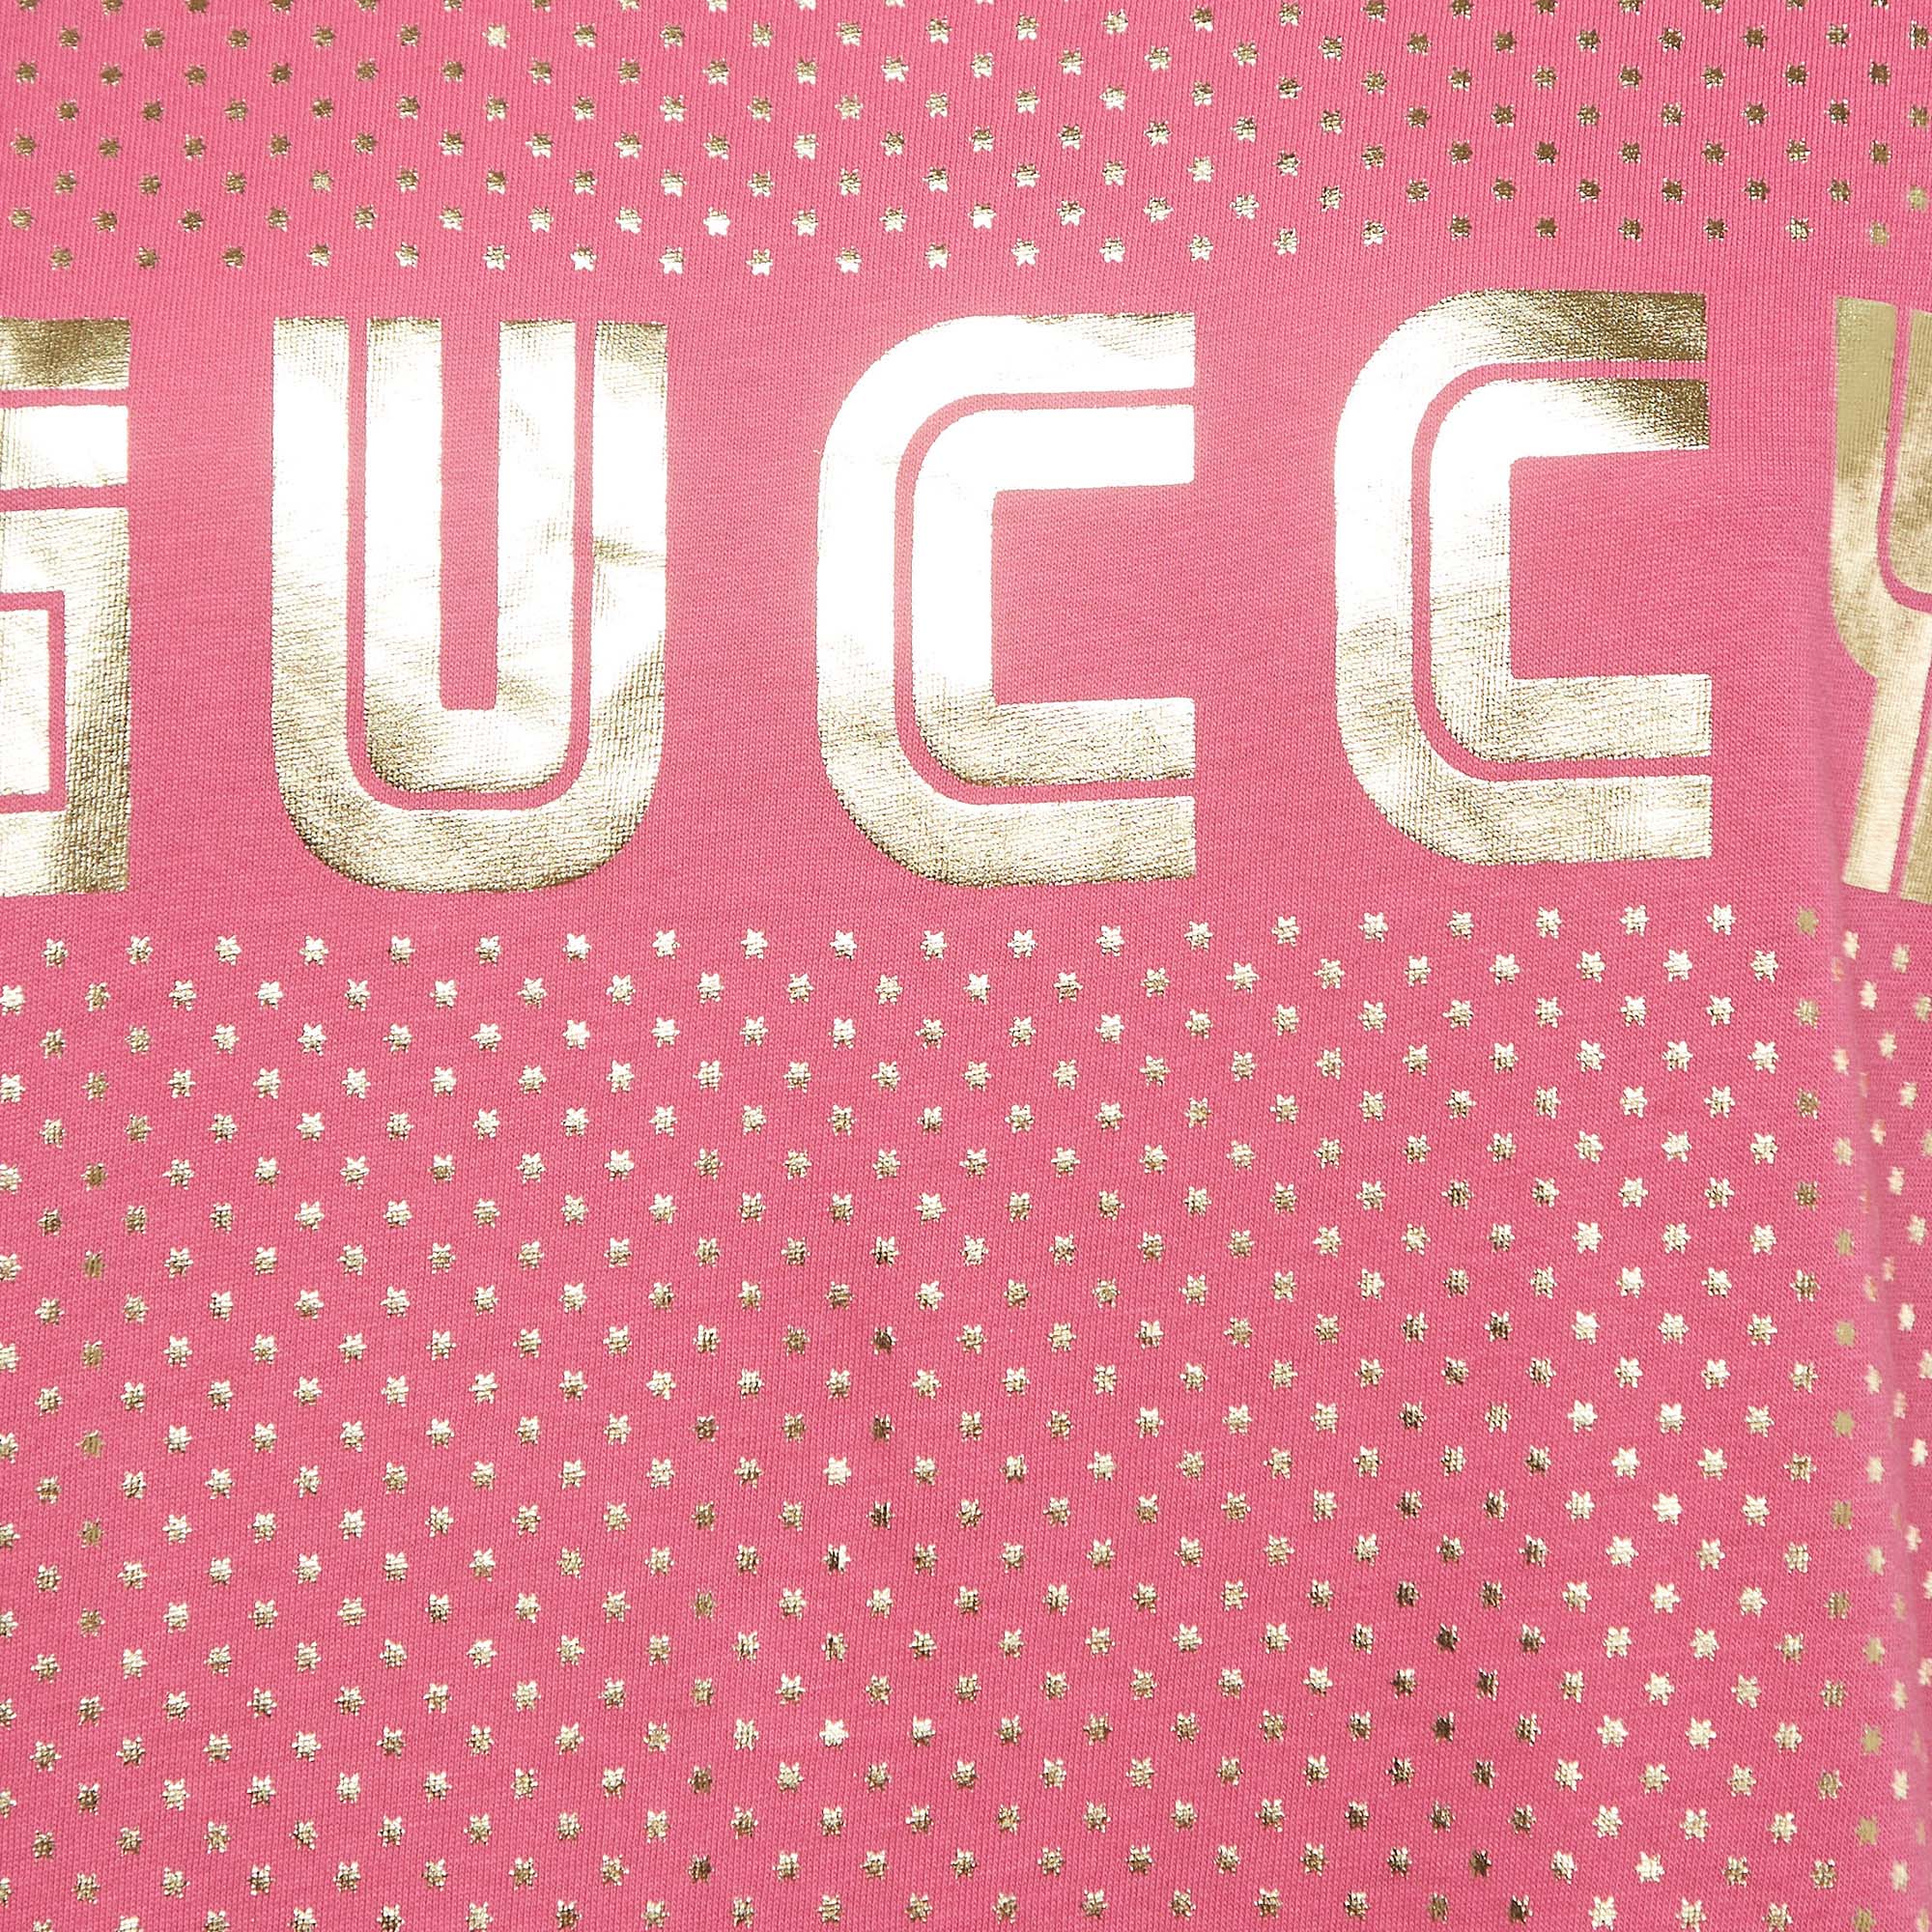 Gucci Pink Logo Printed Cotton Oversized T-Shirt S